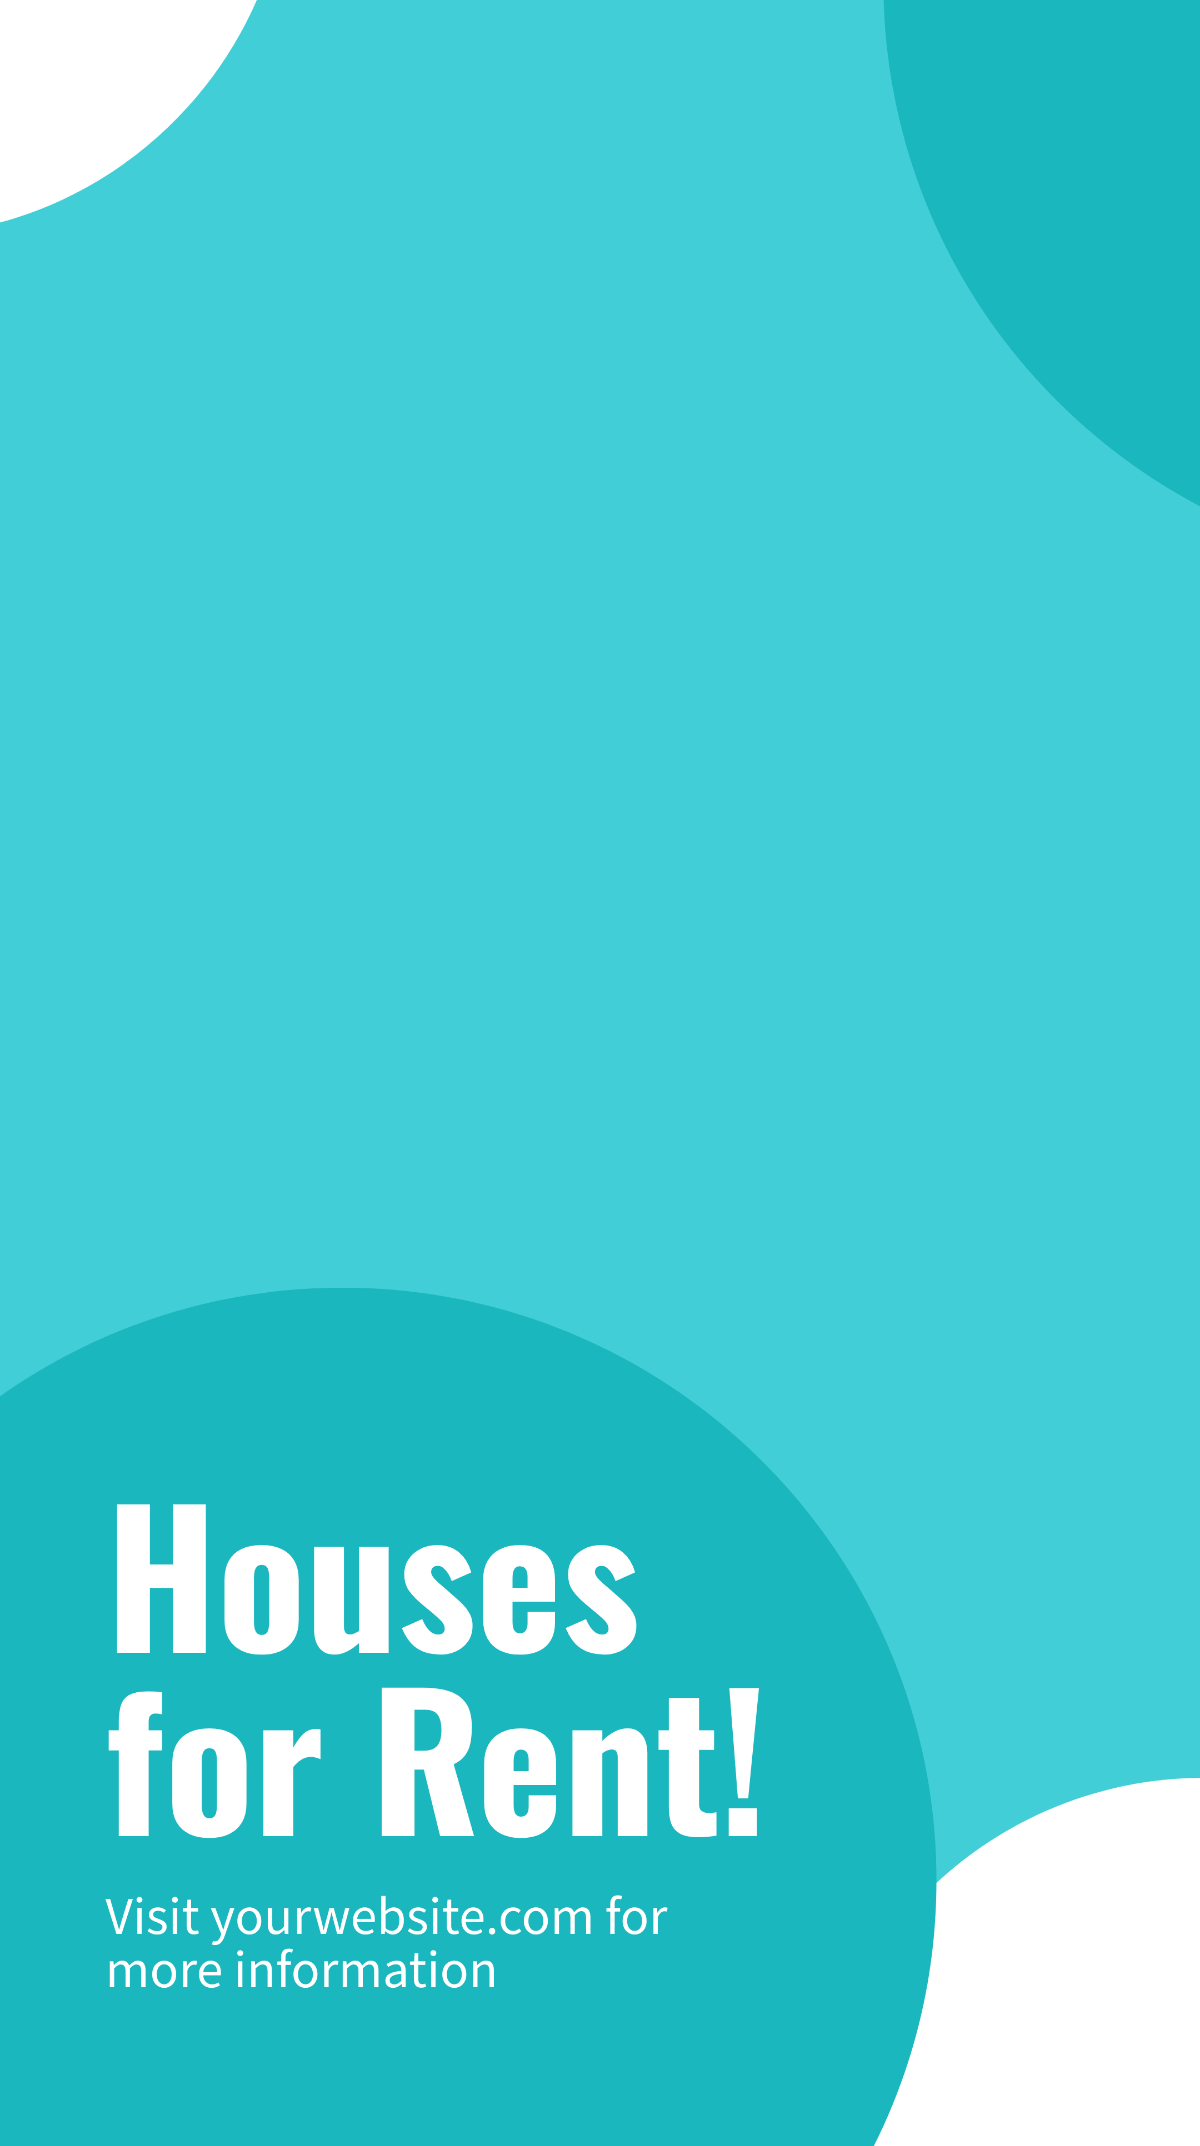 House Rental Snapchat Geofilter Template